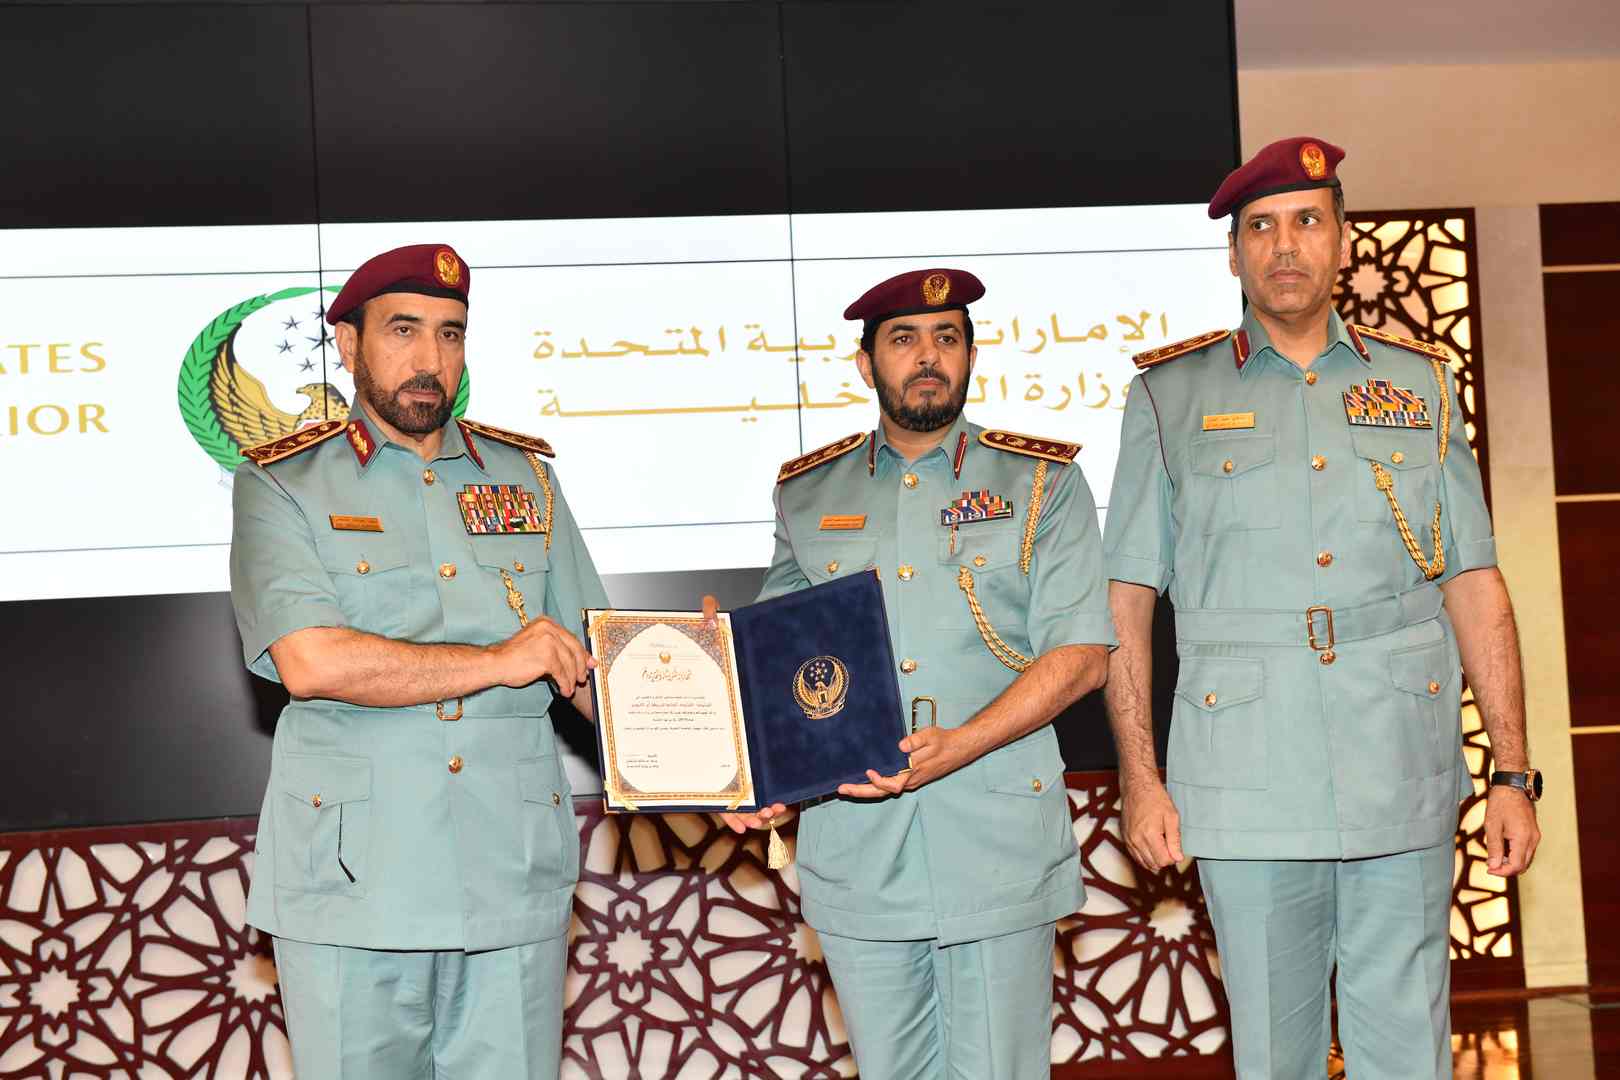 HONORS POLICE LEADERSHIPS, SPEAKERS AND TEAMS OF THE MOI RAMADAN COUNCILS